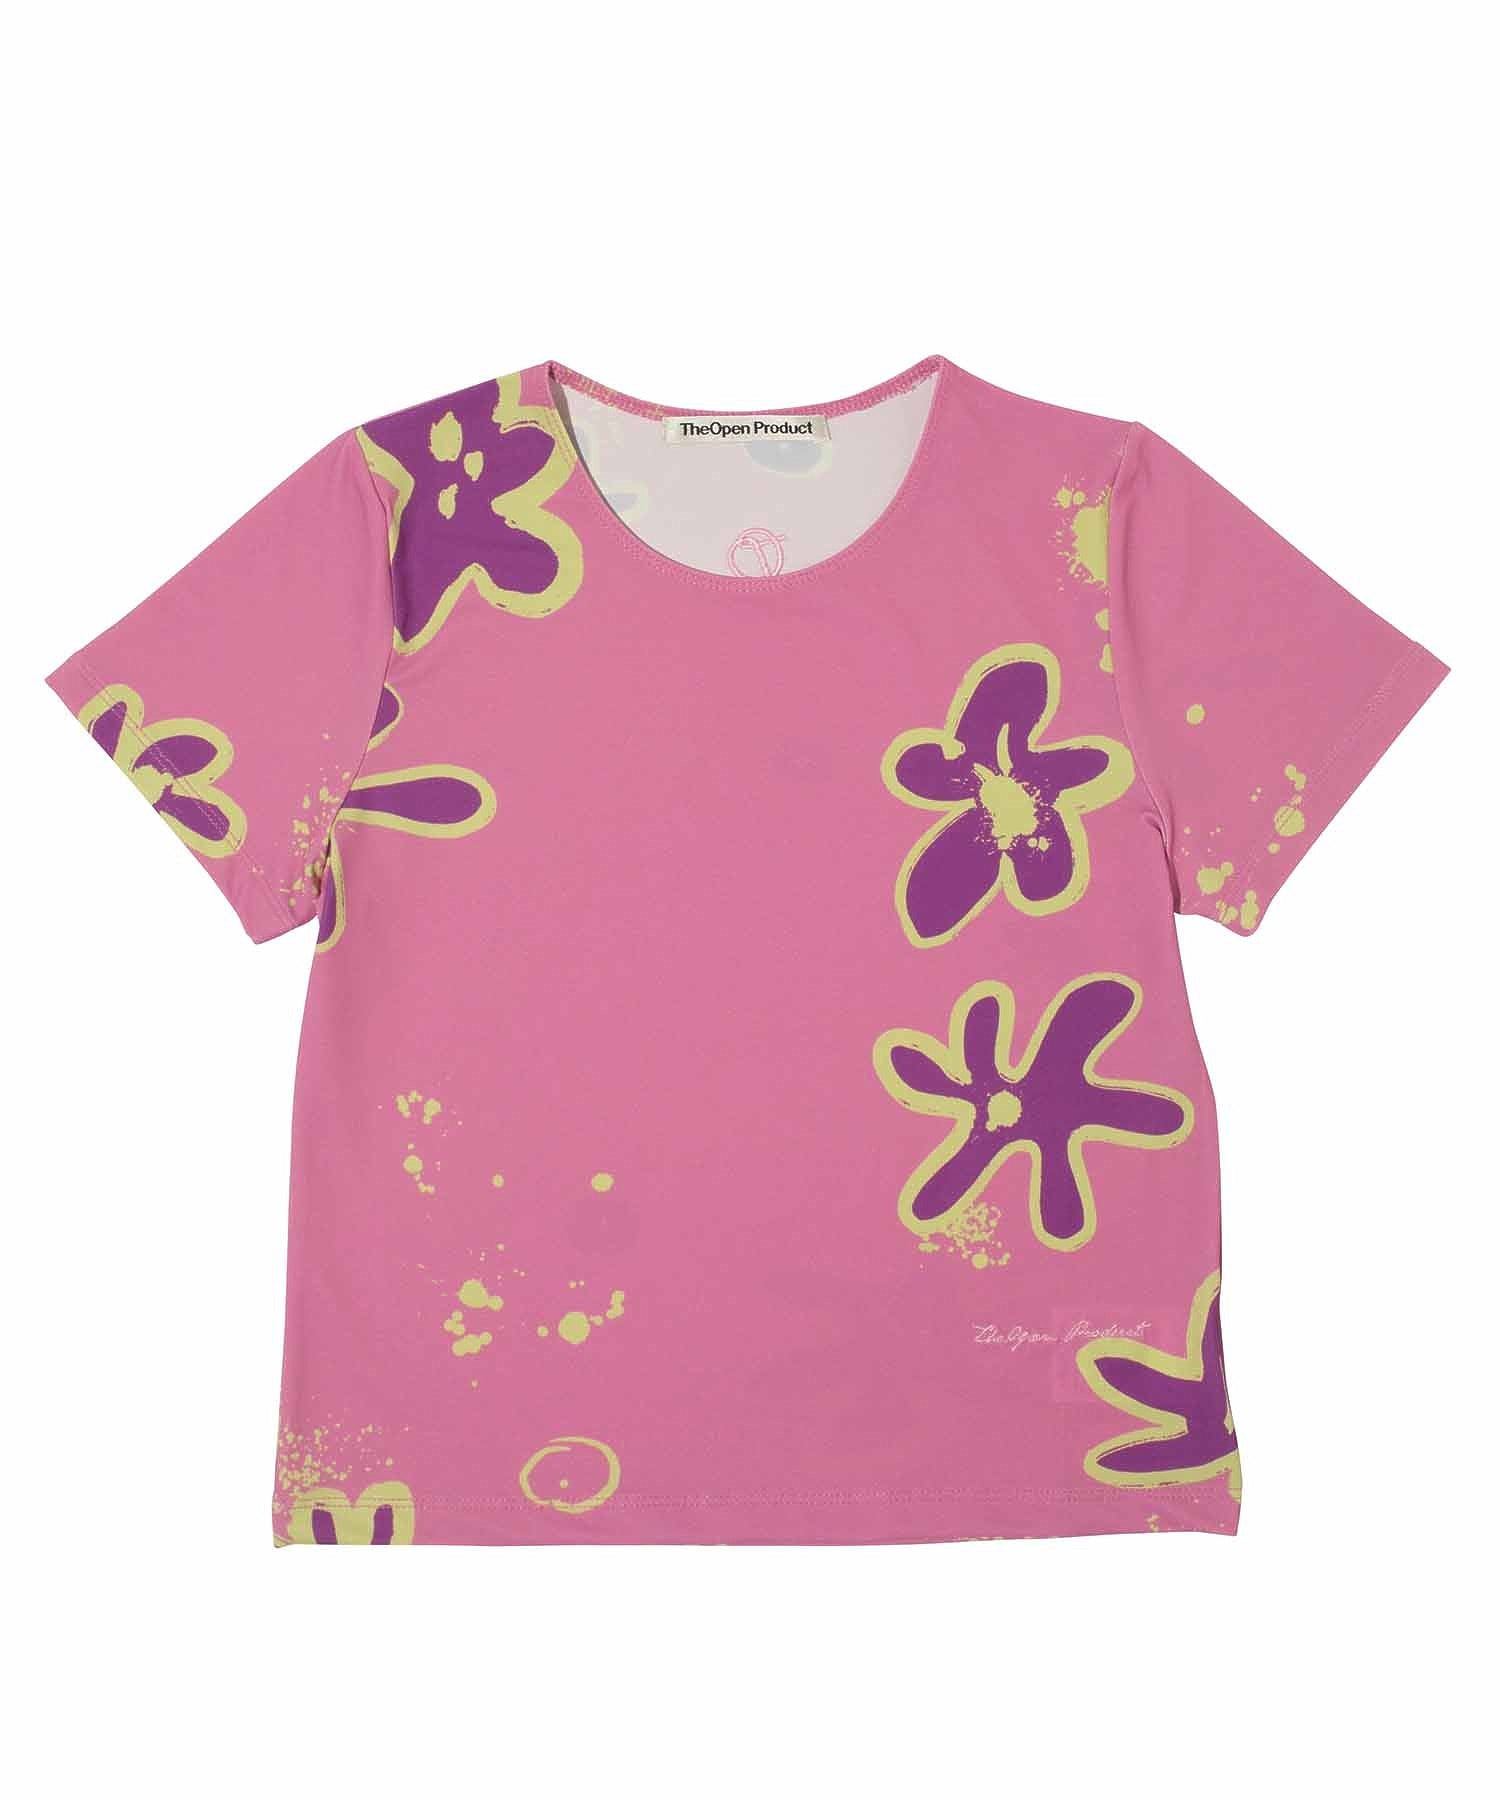 THE OPEN PRODUCT /ザオープンプロダクト/ FLOWER BABY T-SHIRT GTO222TS004